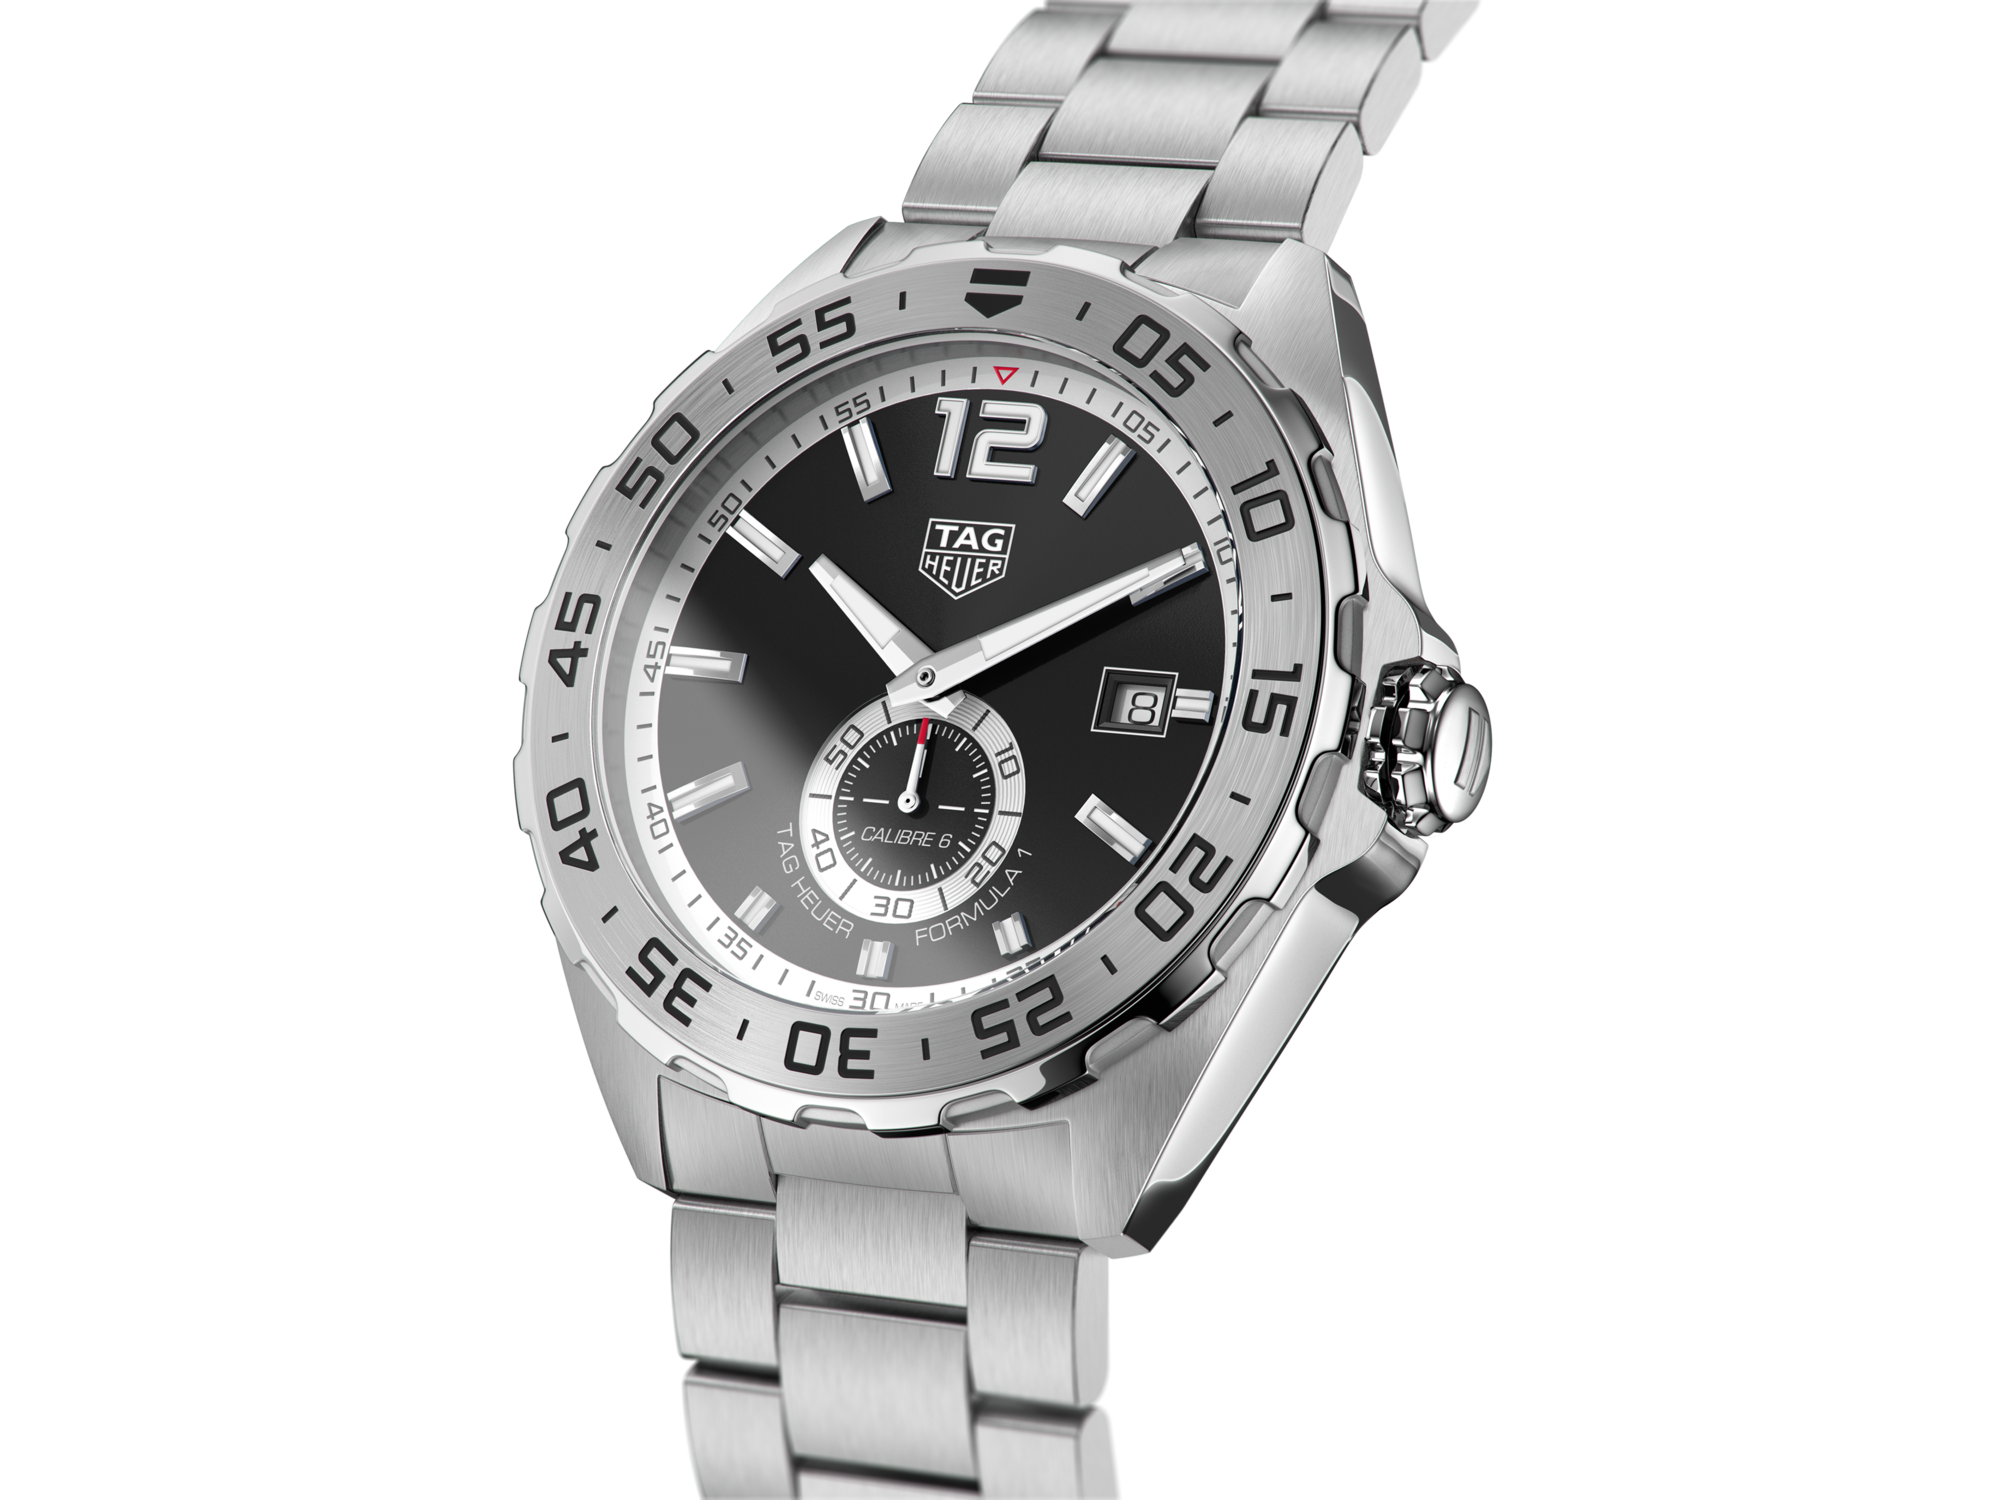 TAG Heuer CARRERA CALIBRE 360 WHITE GOLD Limited EditionTAG Heuer CARRERA CALIBRE HEUER 02 GMT 45 mm